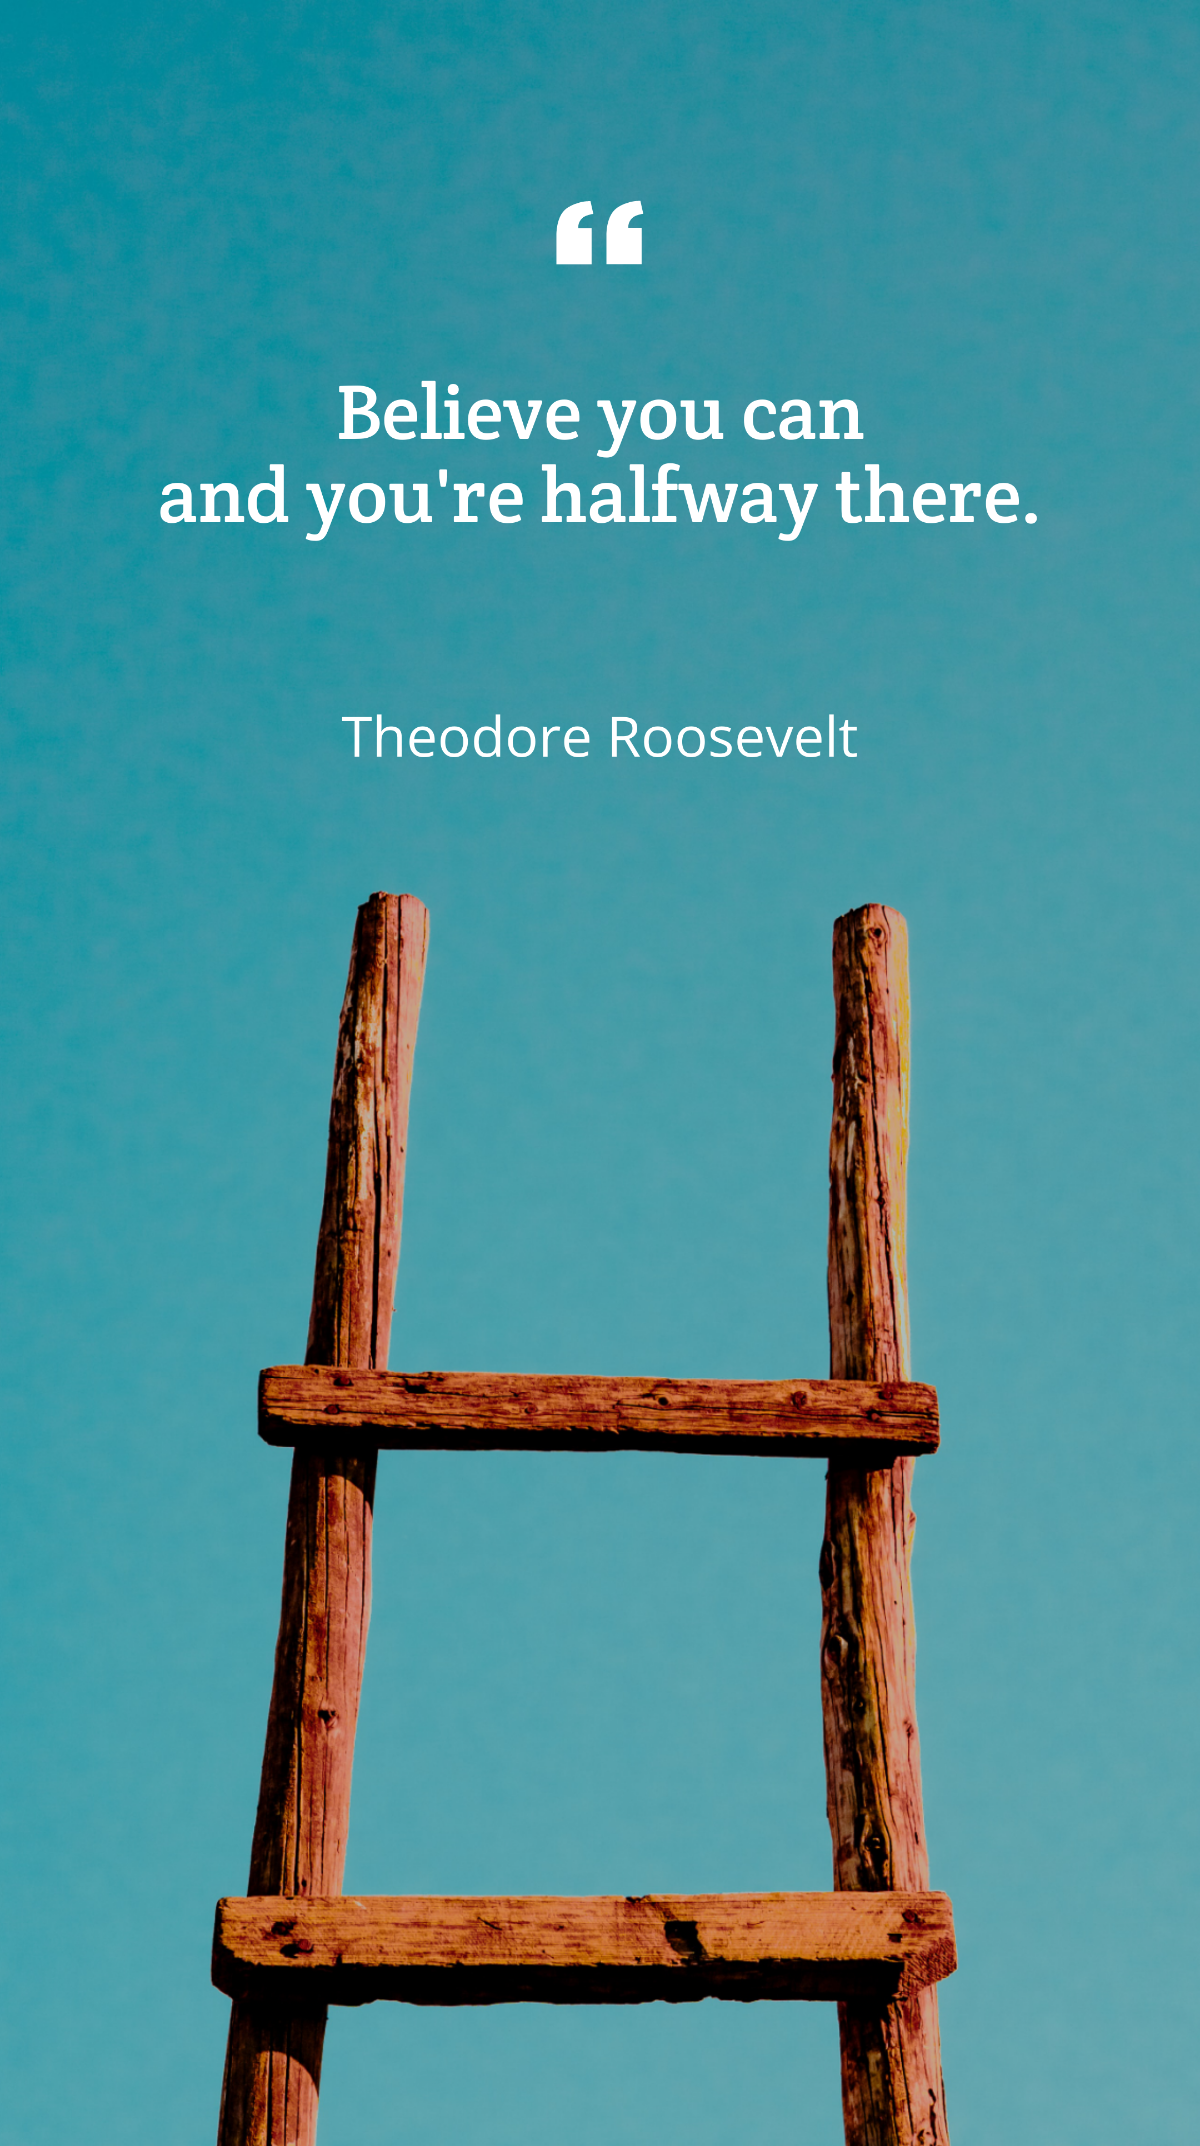 Theodore Roosevelt - Believe you can and you're halfway there Template